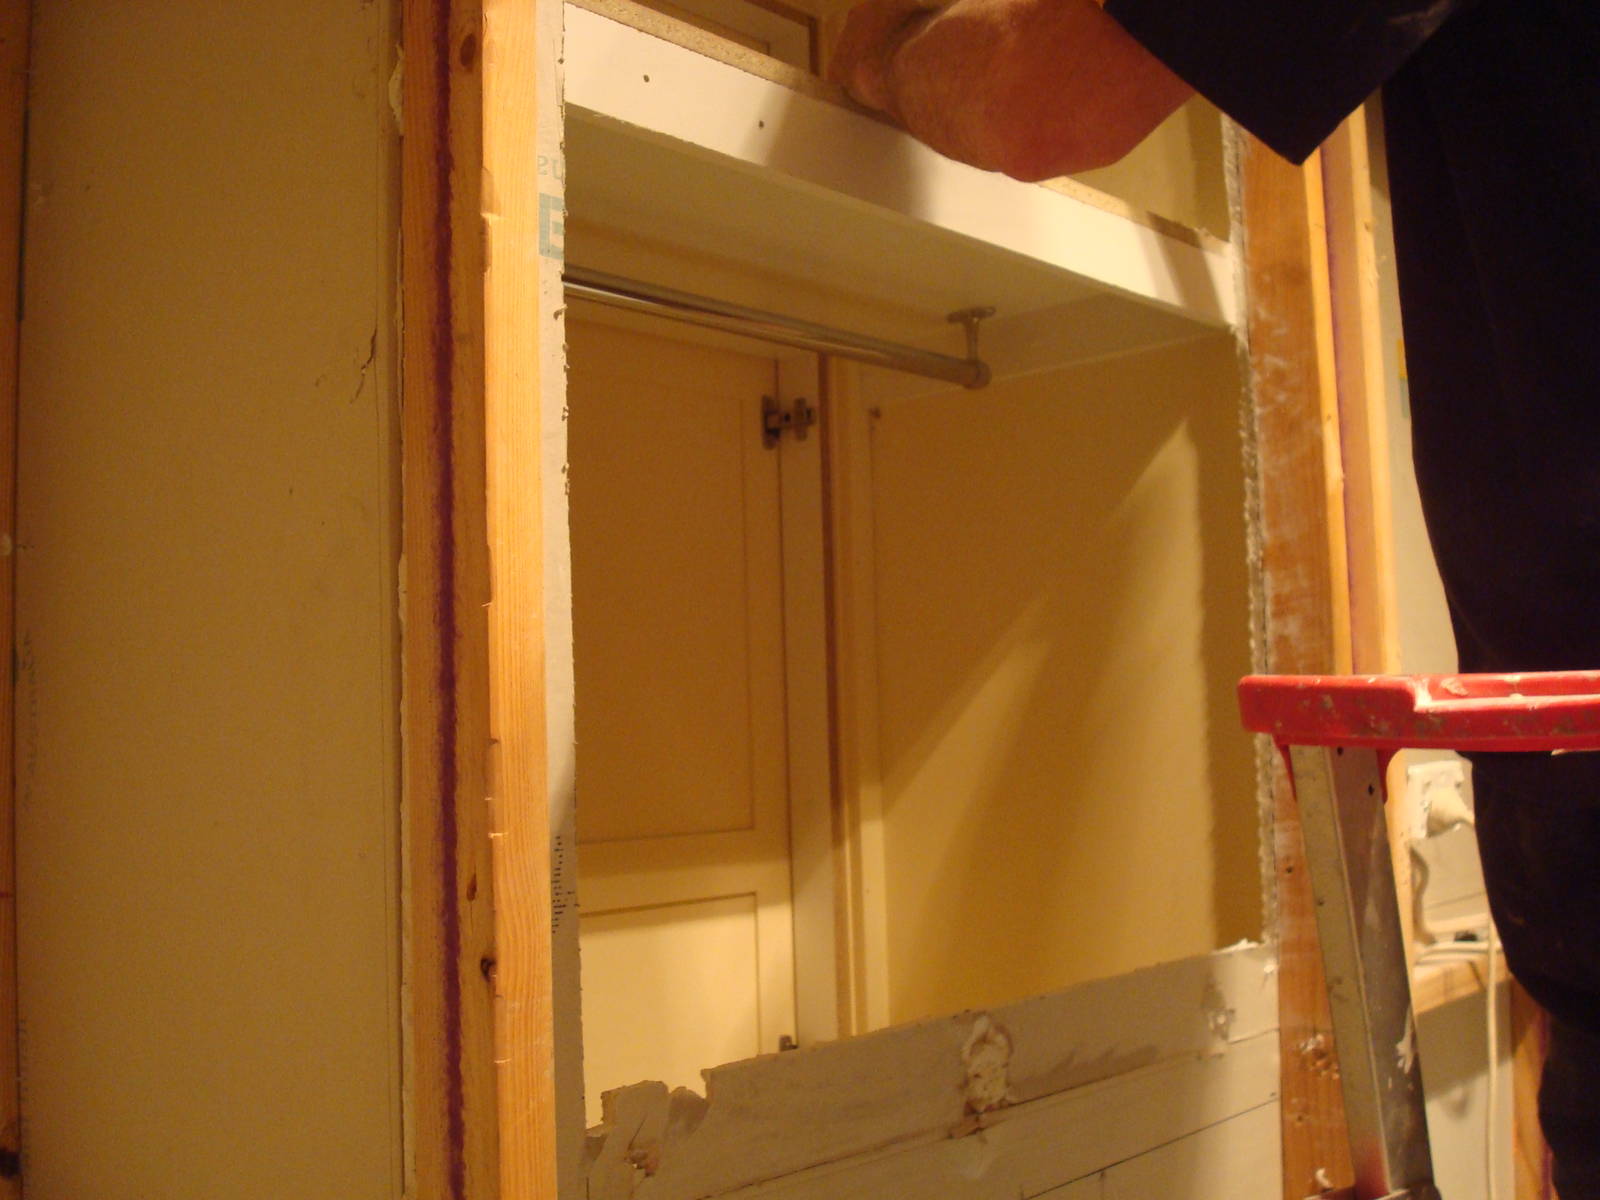 mirror cabinet in wall cavity